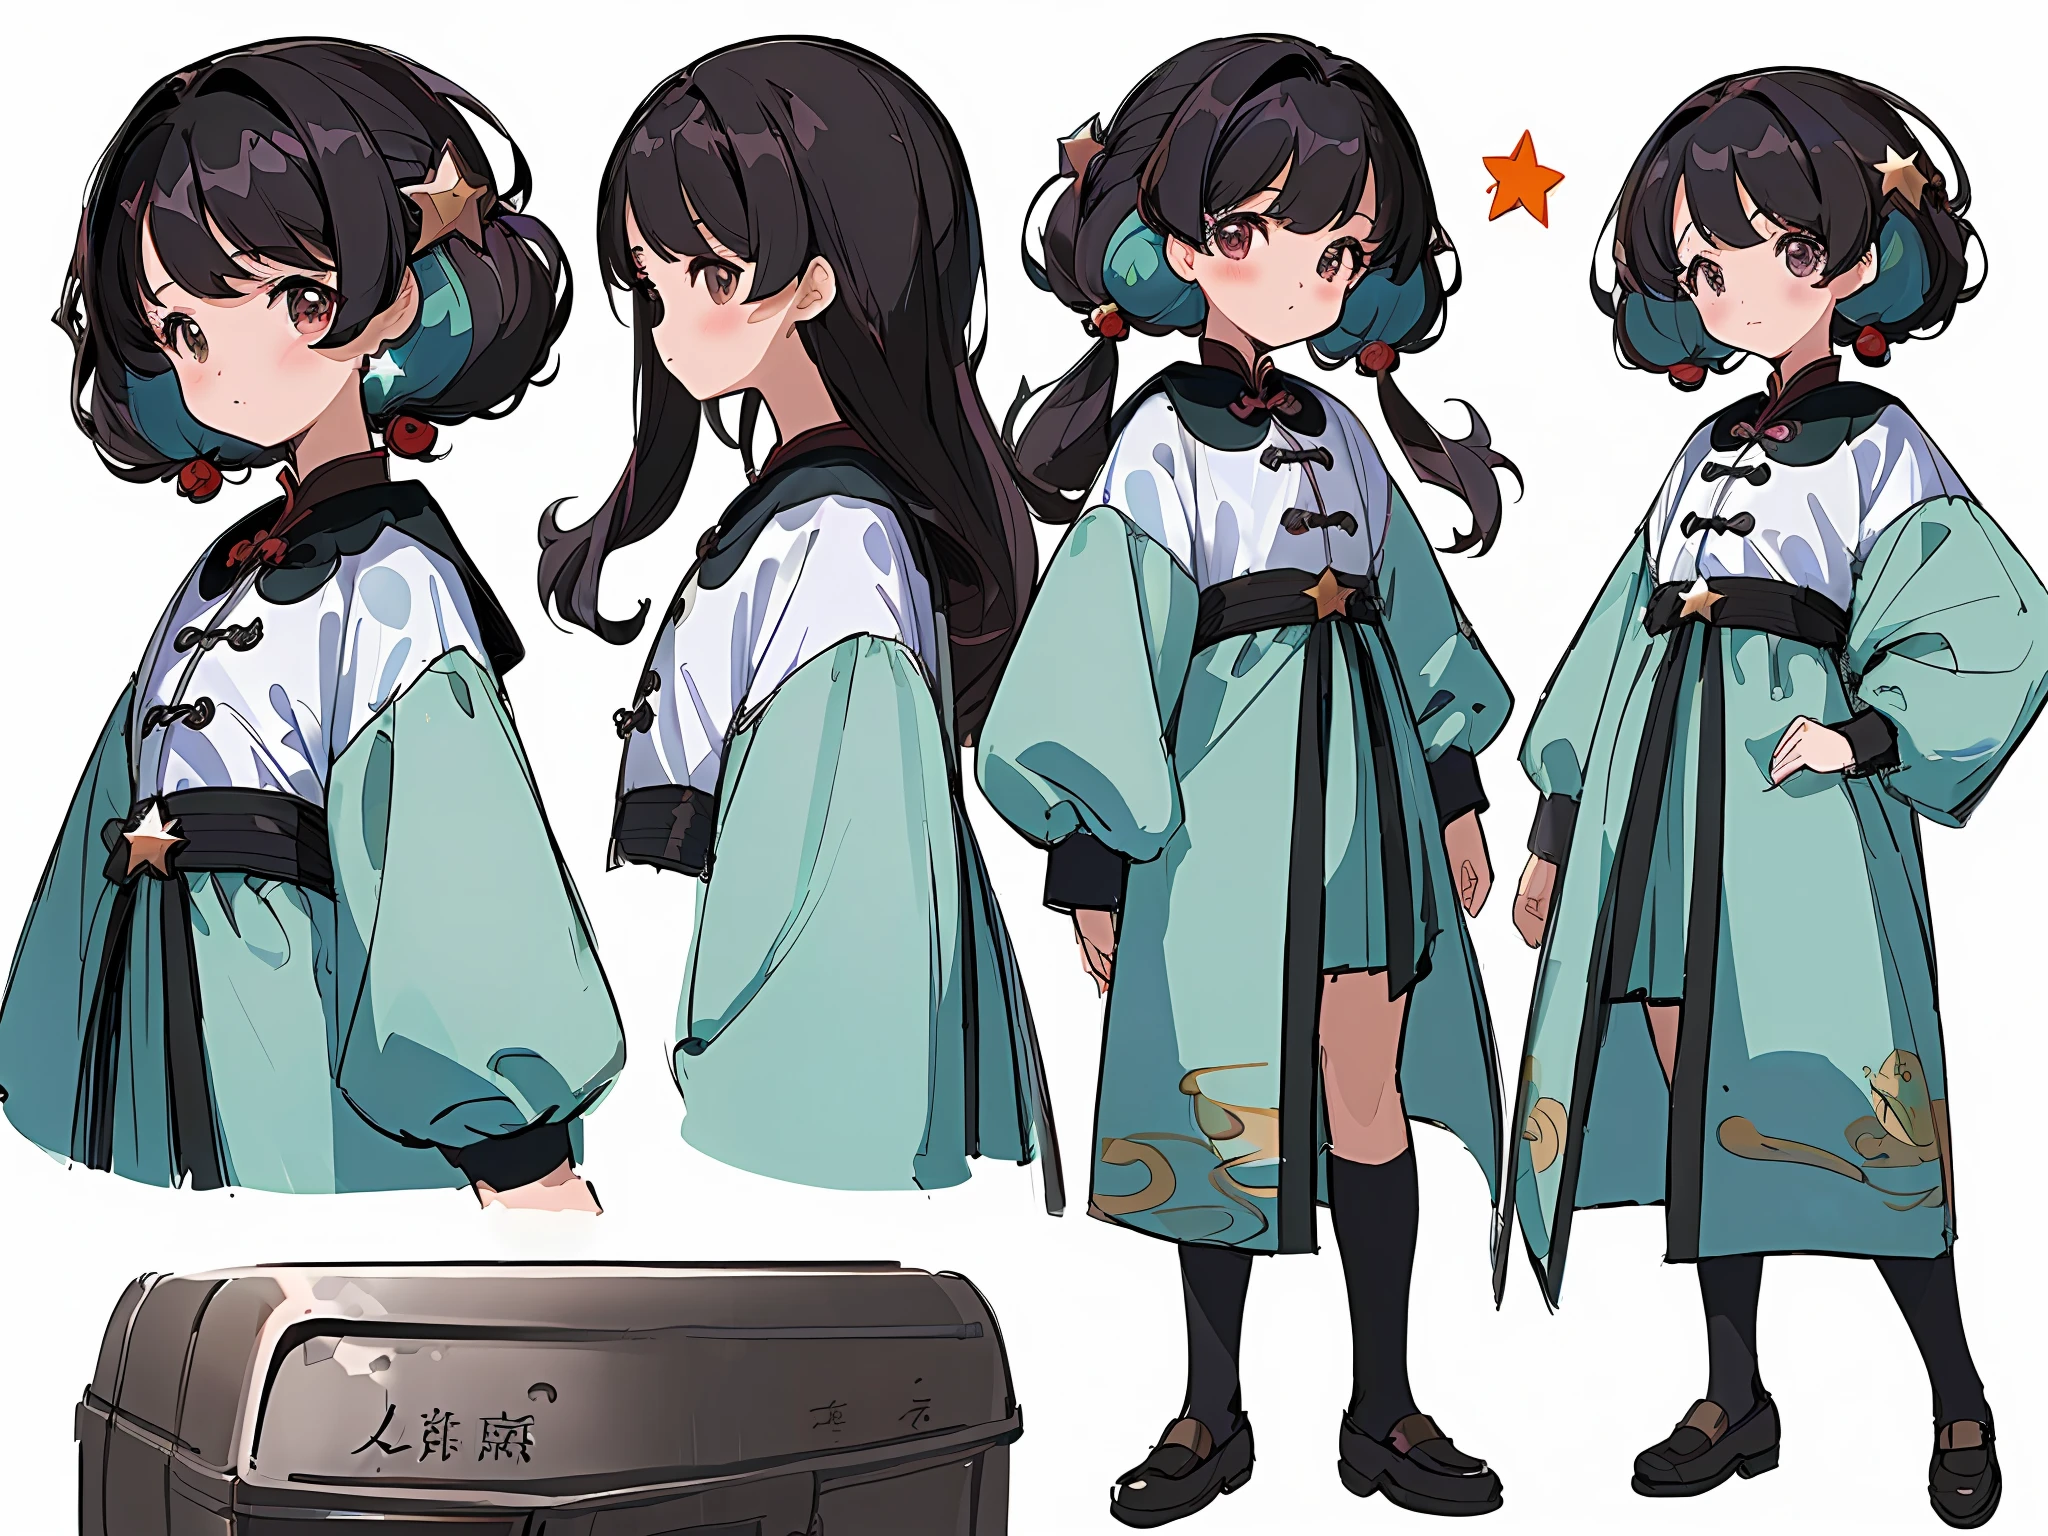 ((masterpiece)),(((best quality))),(character design sheet, same character, front, side, back), illustration, 1 girl, hair color, bangs, hairstyle fax, eyes, environment change scene, Hairstyle Fax, Pose Zitai, Female, Shirt Shangyi, Star, Charturnbetalora, (simple background, white background: 1.3)